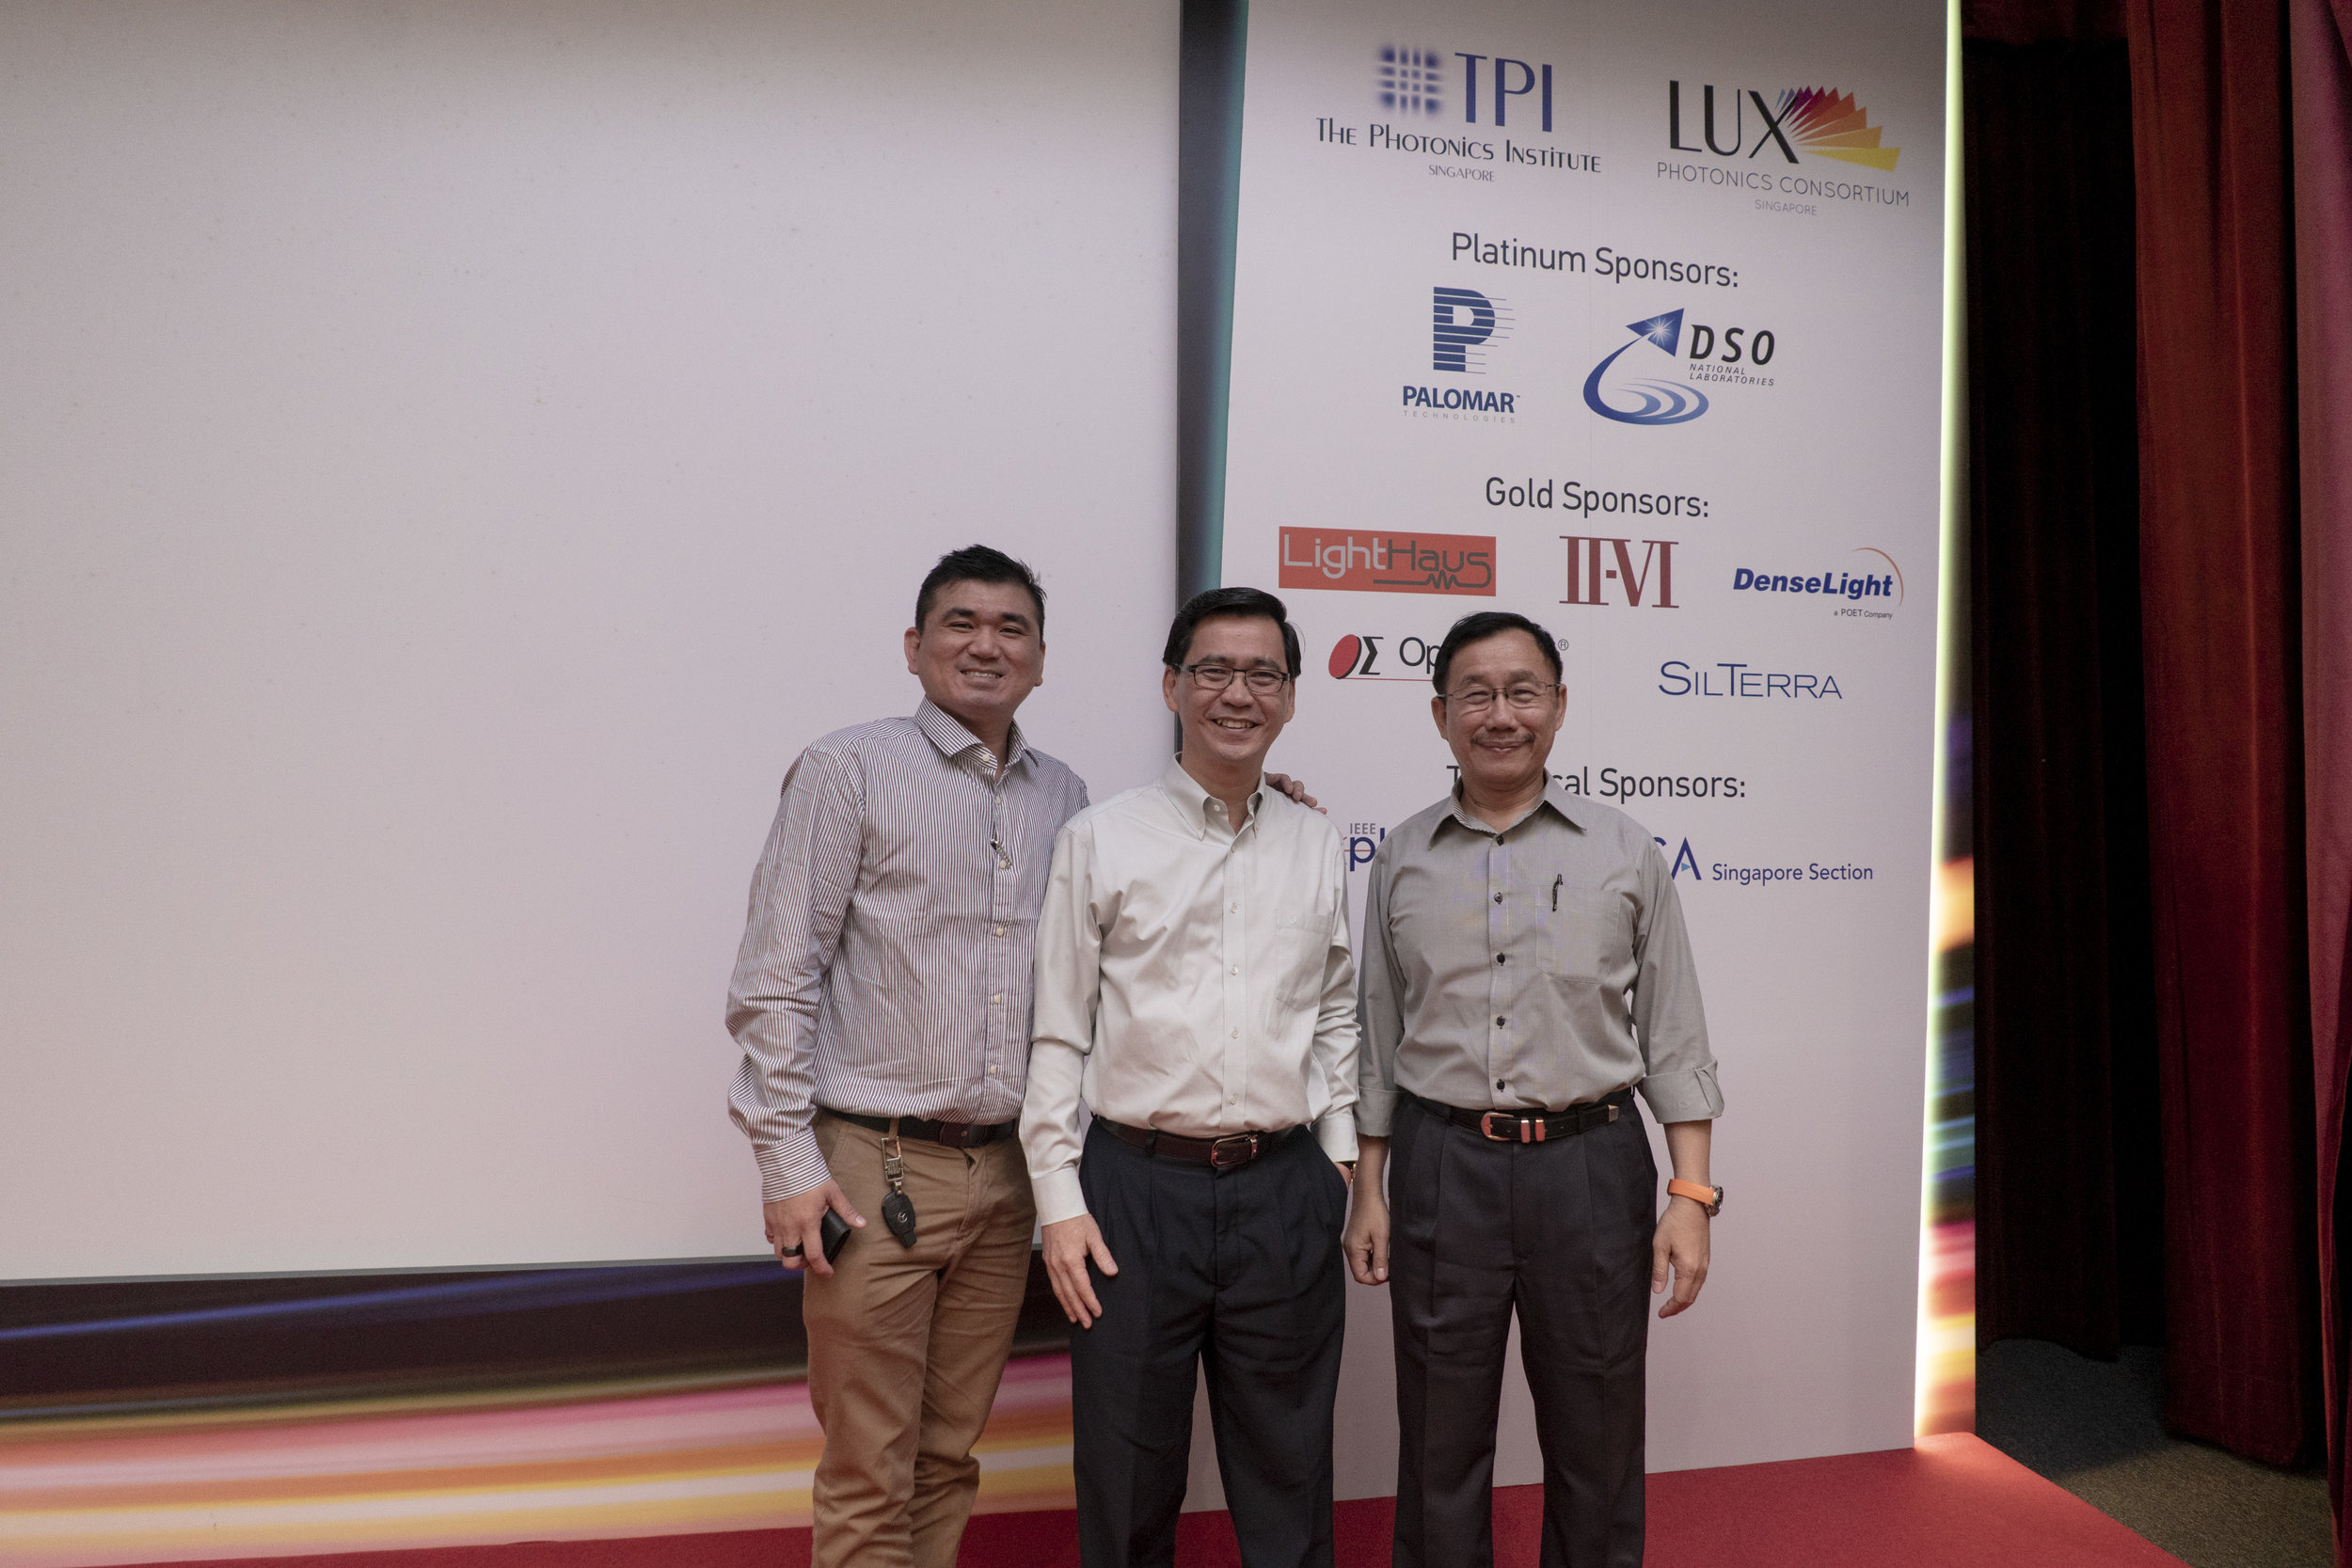 TPI Photonics SG 2018 Conference n Exhibition 0190rc.jpg